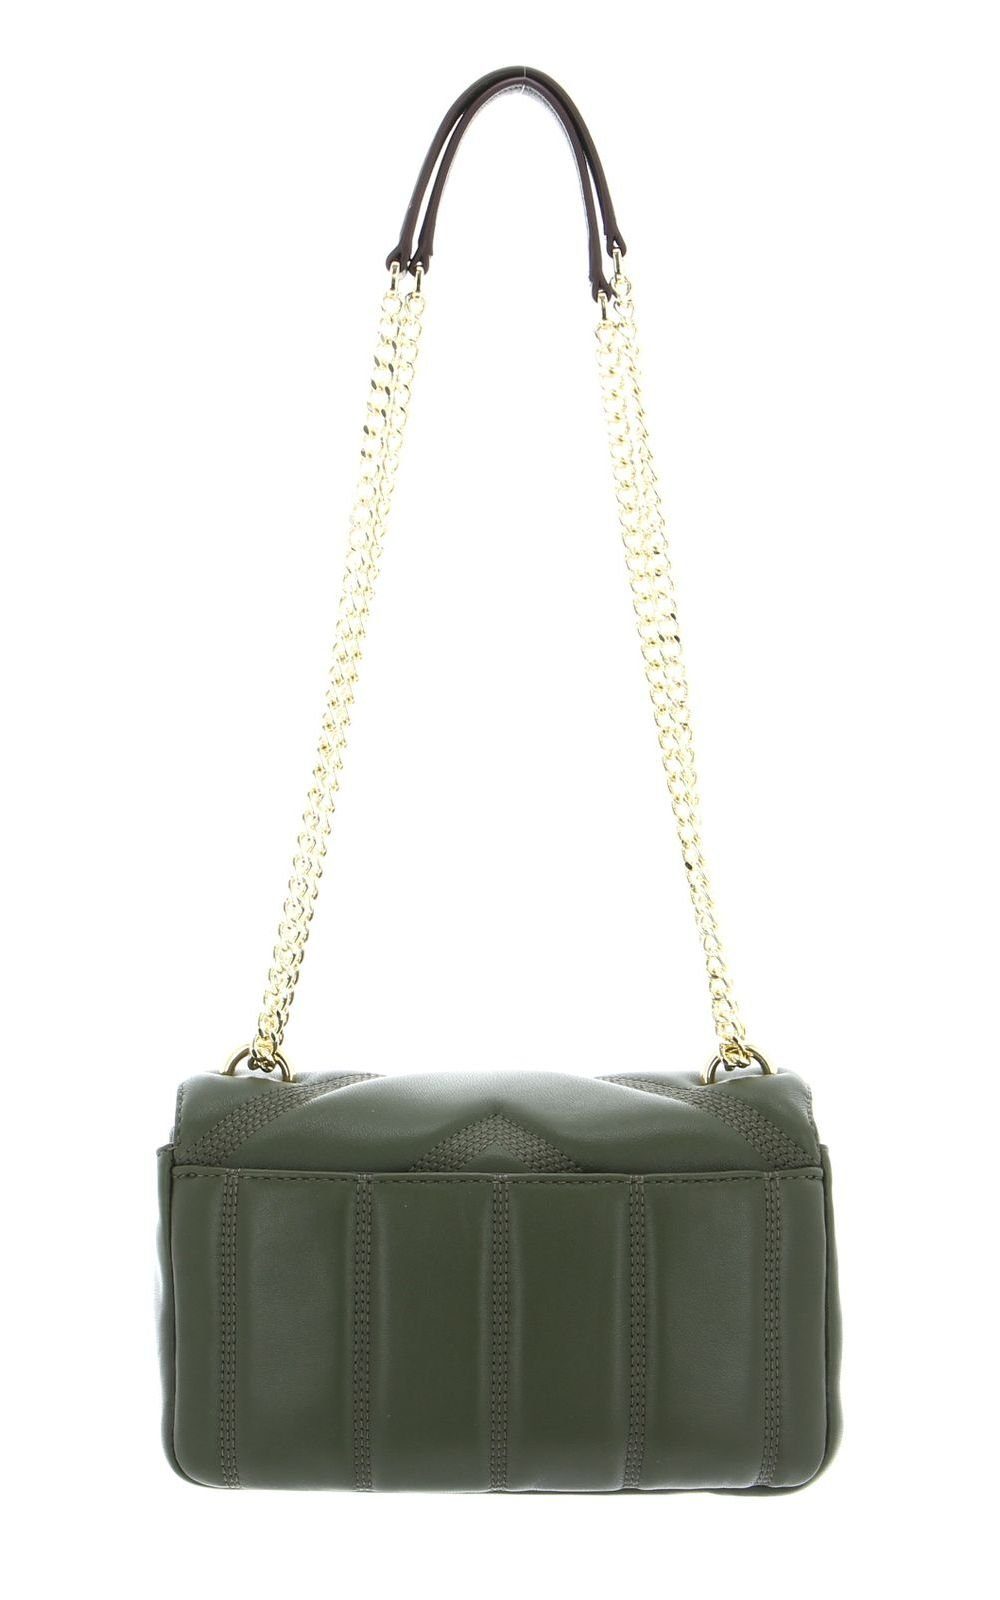 Becca Army Green Schultertasche DKNY